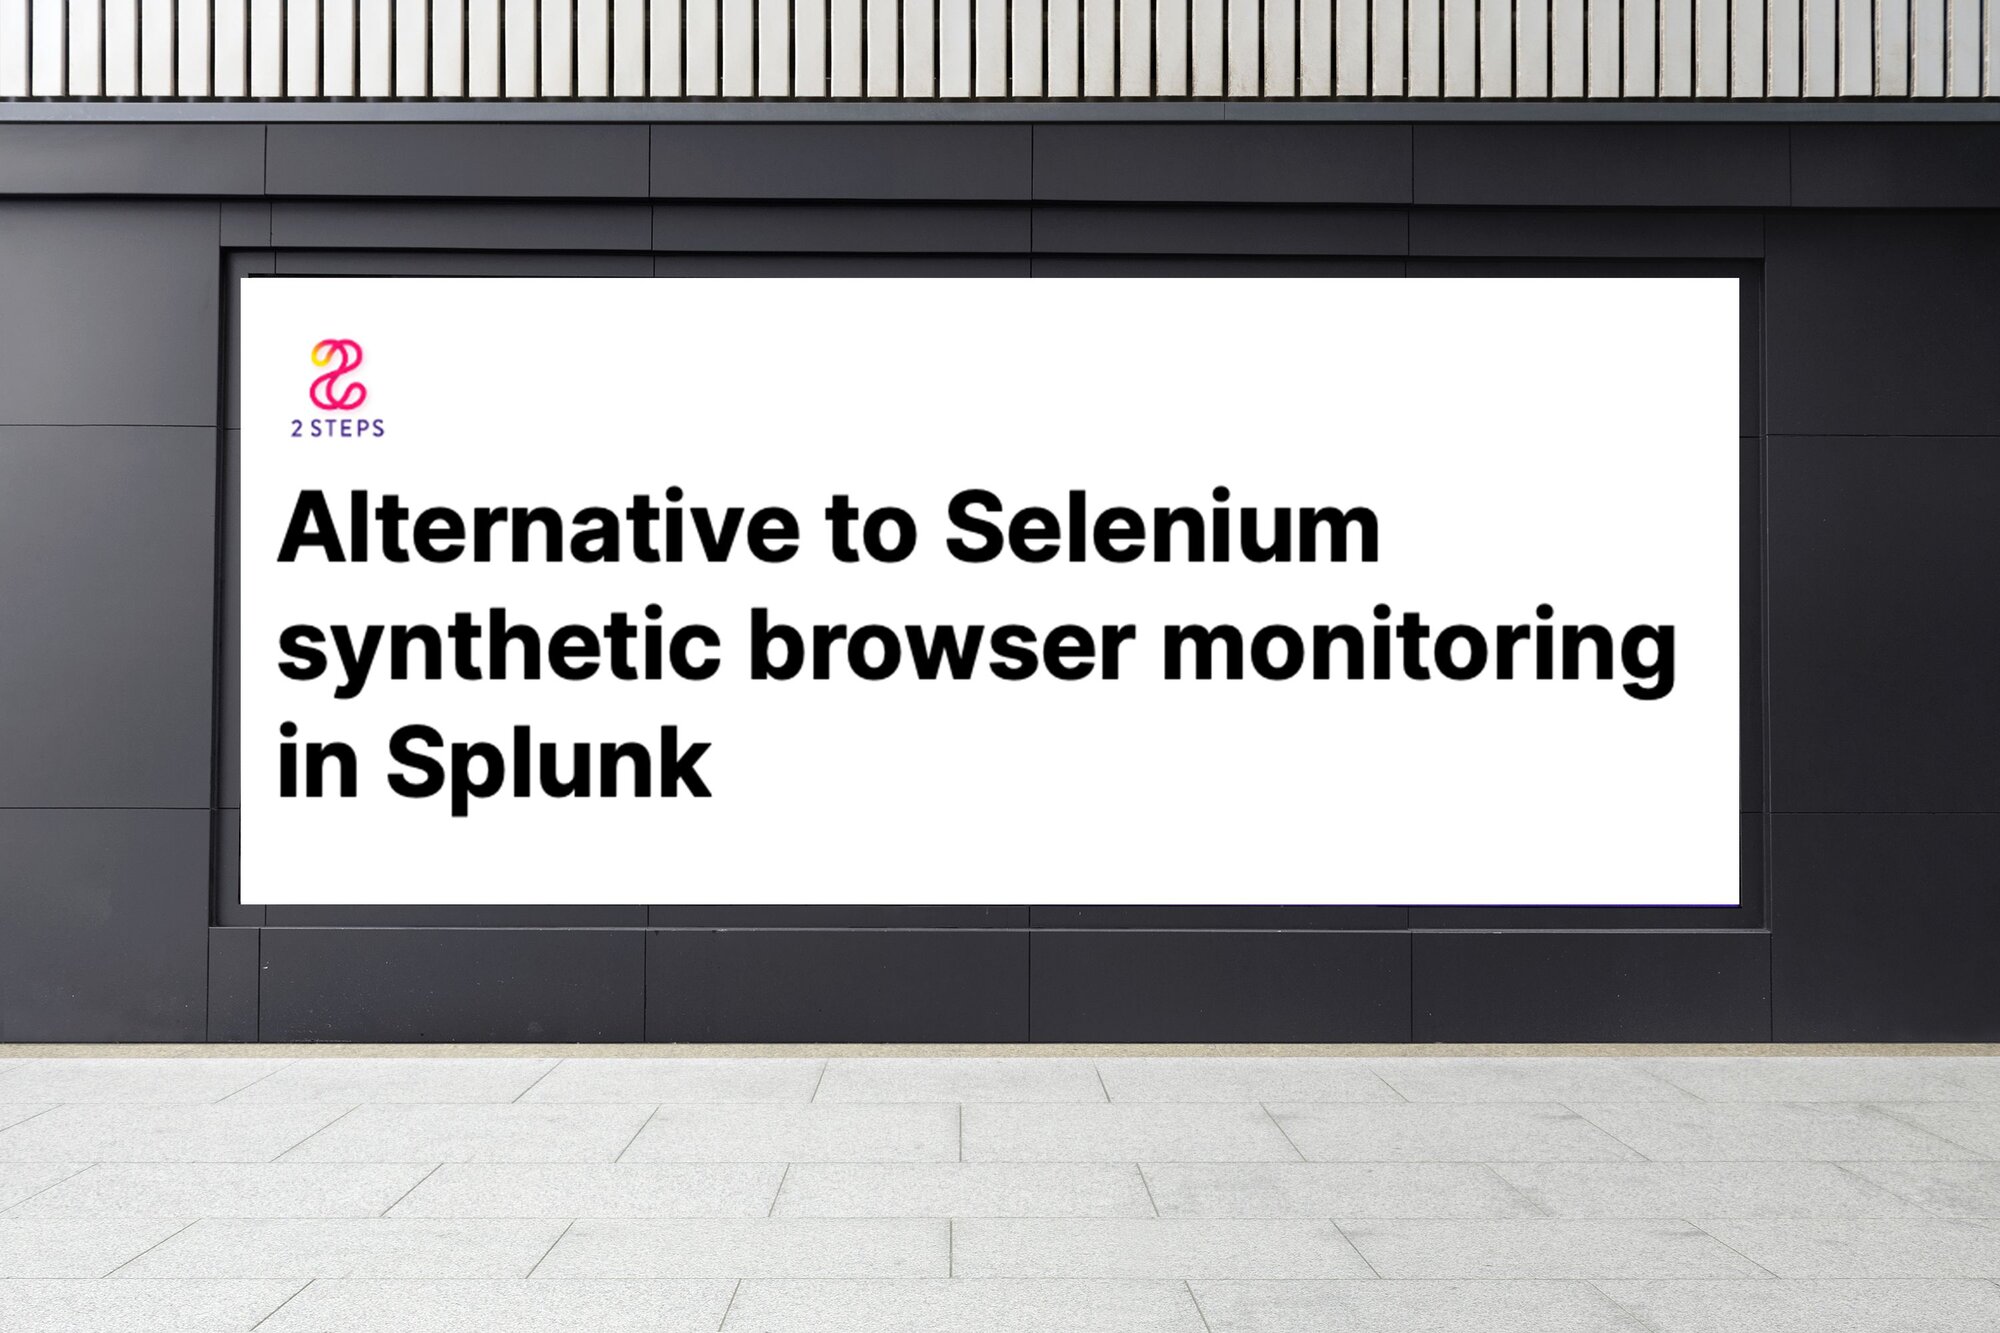 Alternative to Selenium synthetic browser monitoring in Splunk